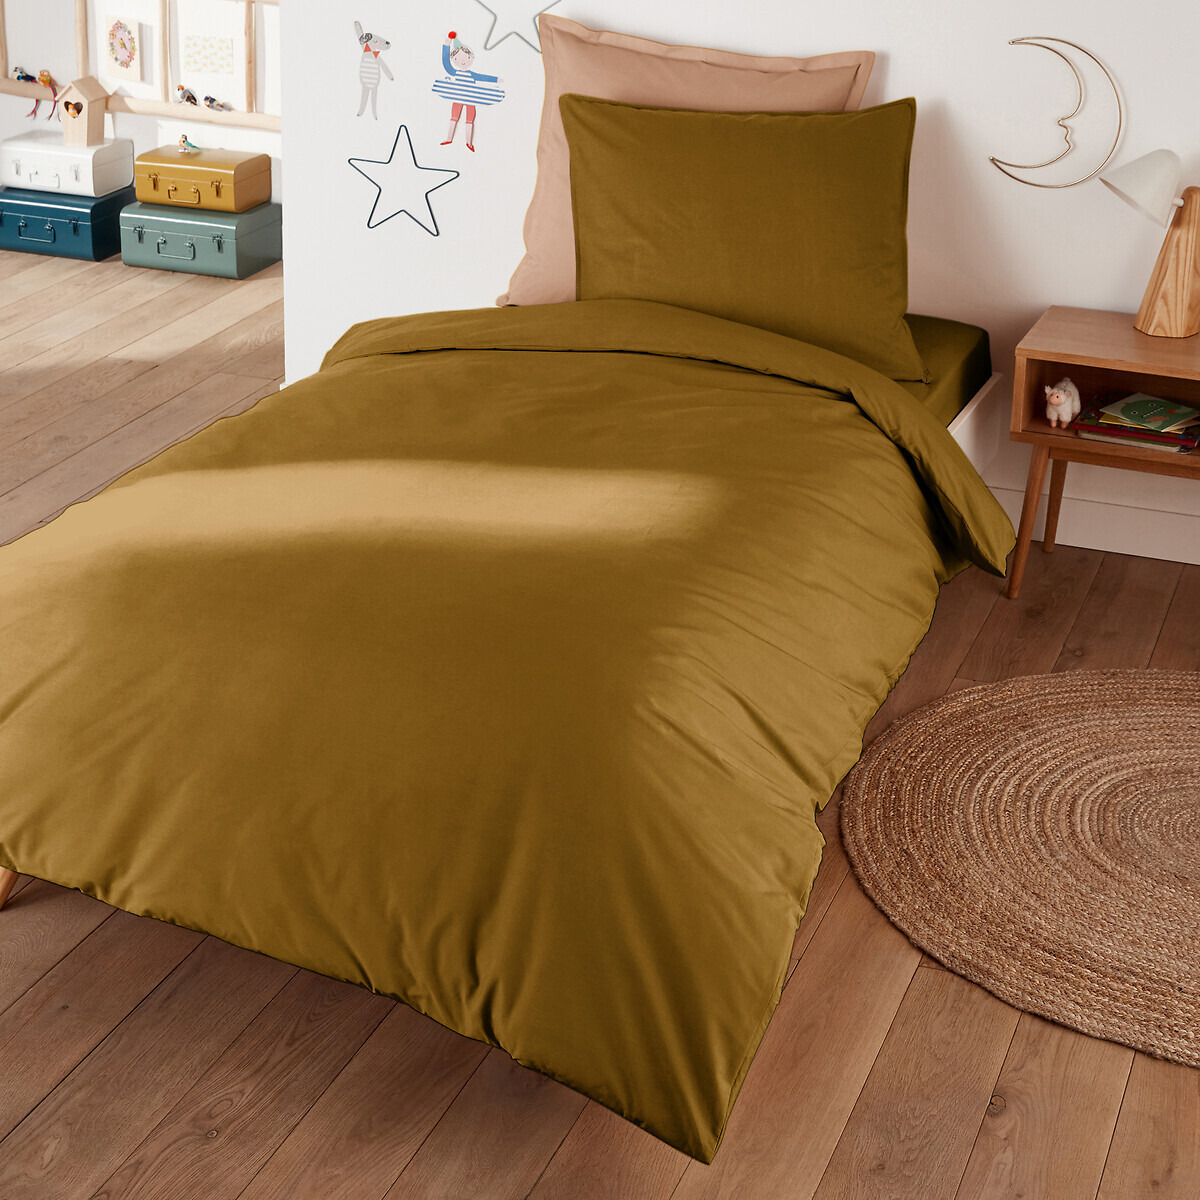 Best Quality Cotton Percale 200 Thread Count Child's Duvet Cover - image 1